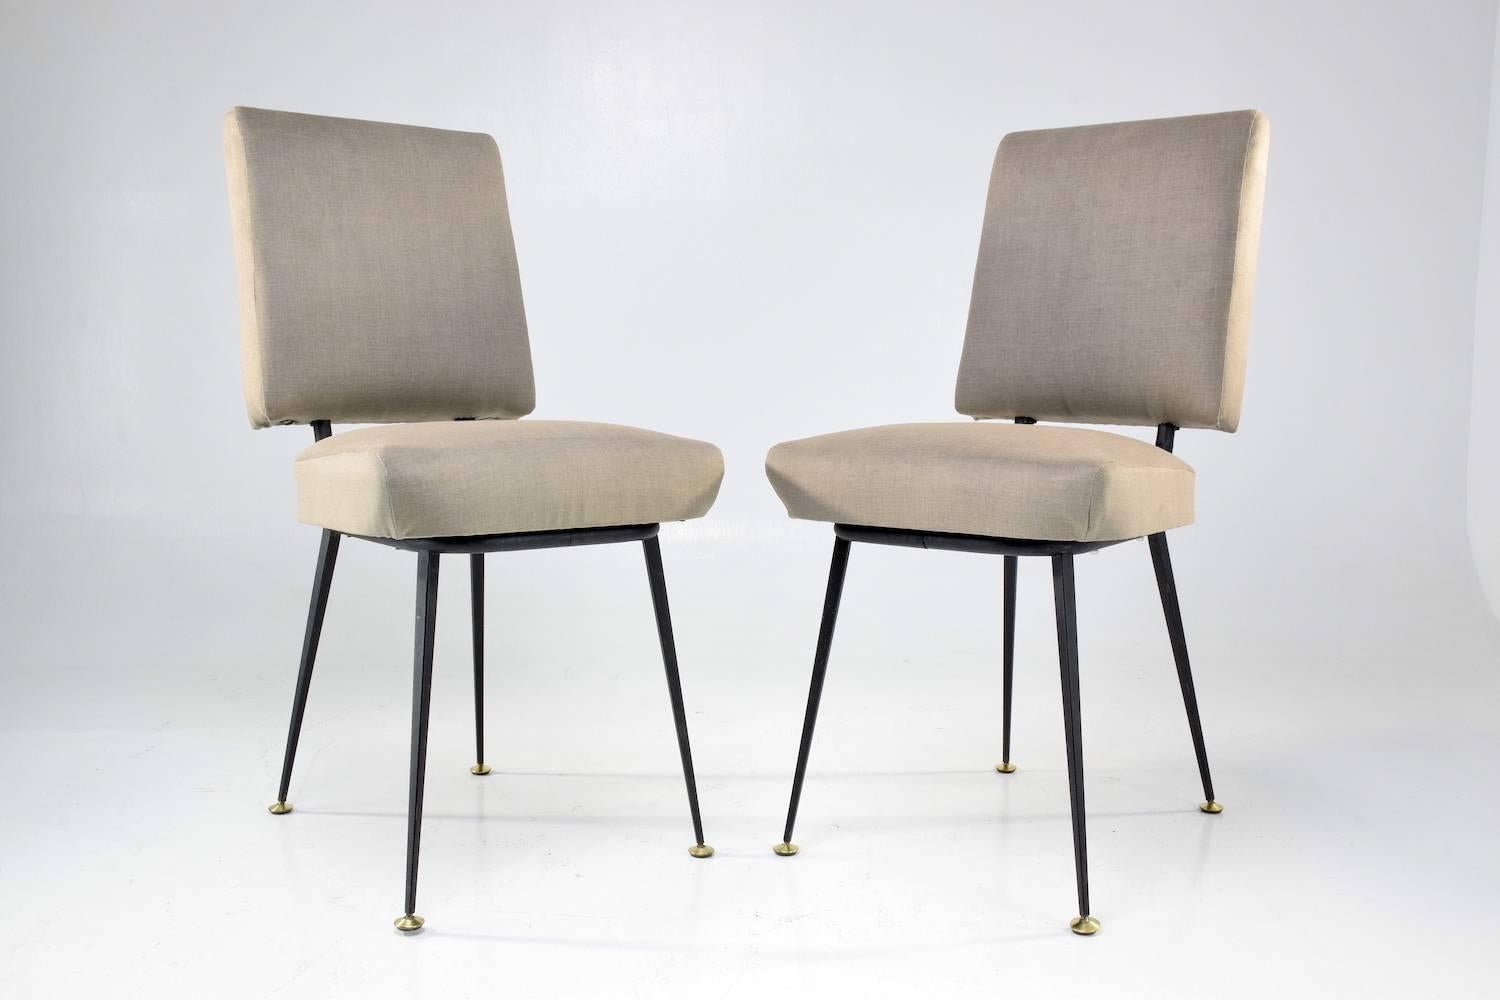 20th century vintage set of two of restored French chairs composed of a black lacquered steel structure, beautiful polished brass endings and re-upholstered with new padding in a velvet grey sand colour fabric.

We have left the steel structure in